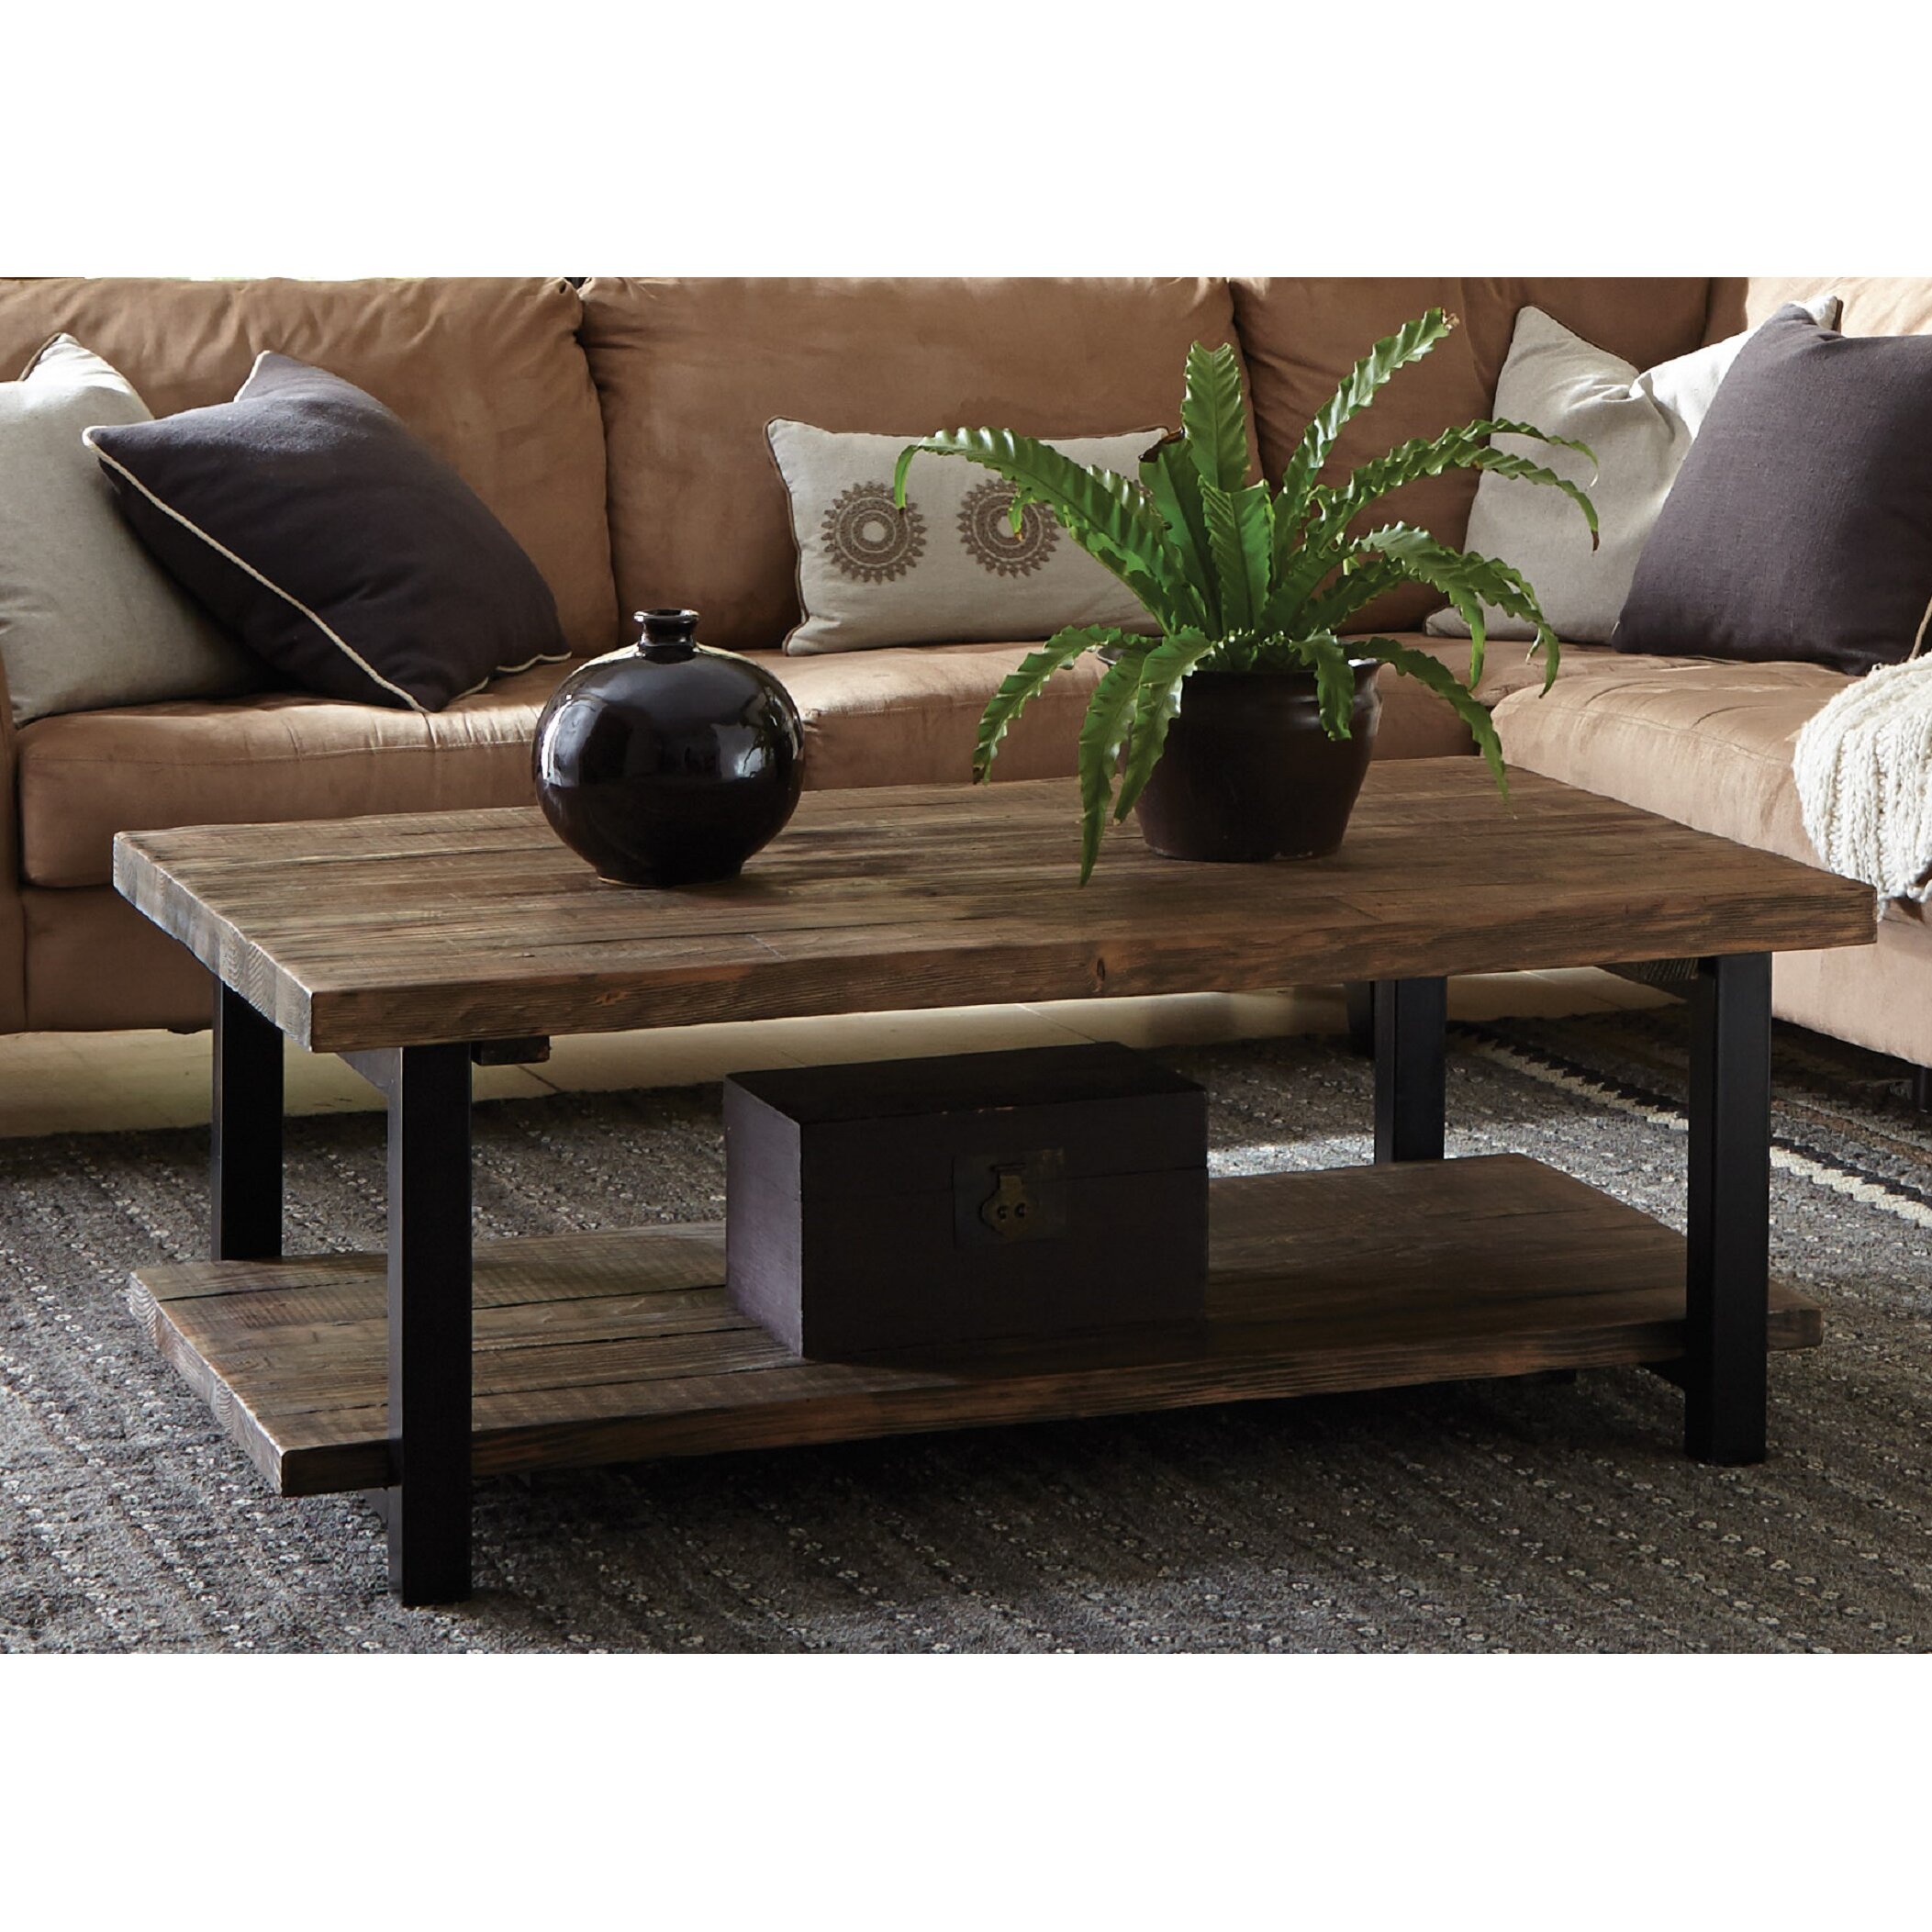 Light Wood Industrial Coffee Table - Light wood industrial round coffee